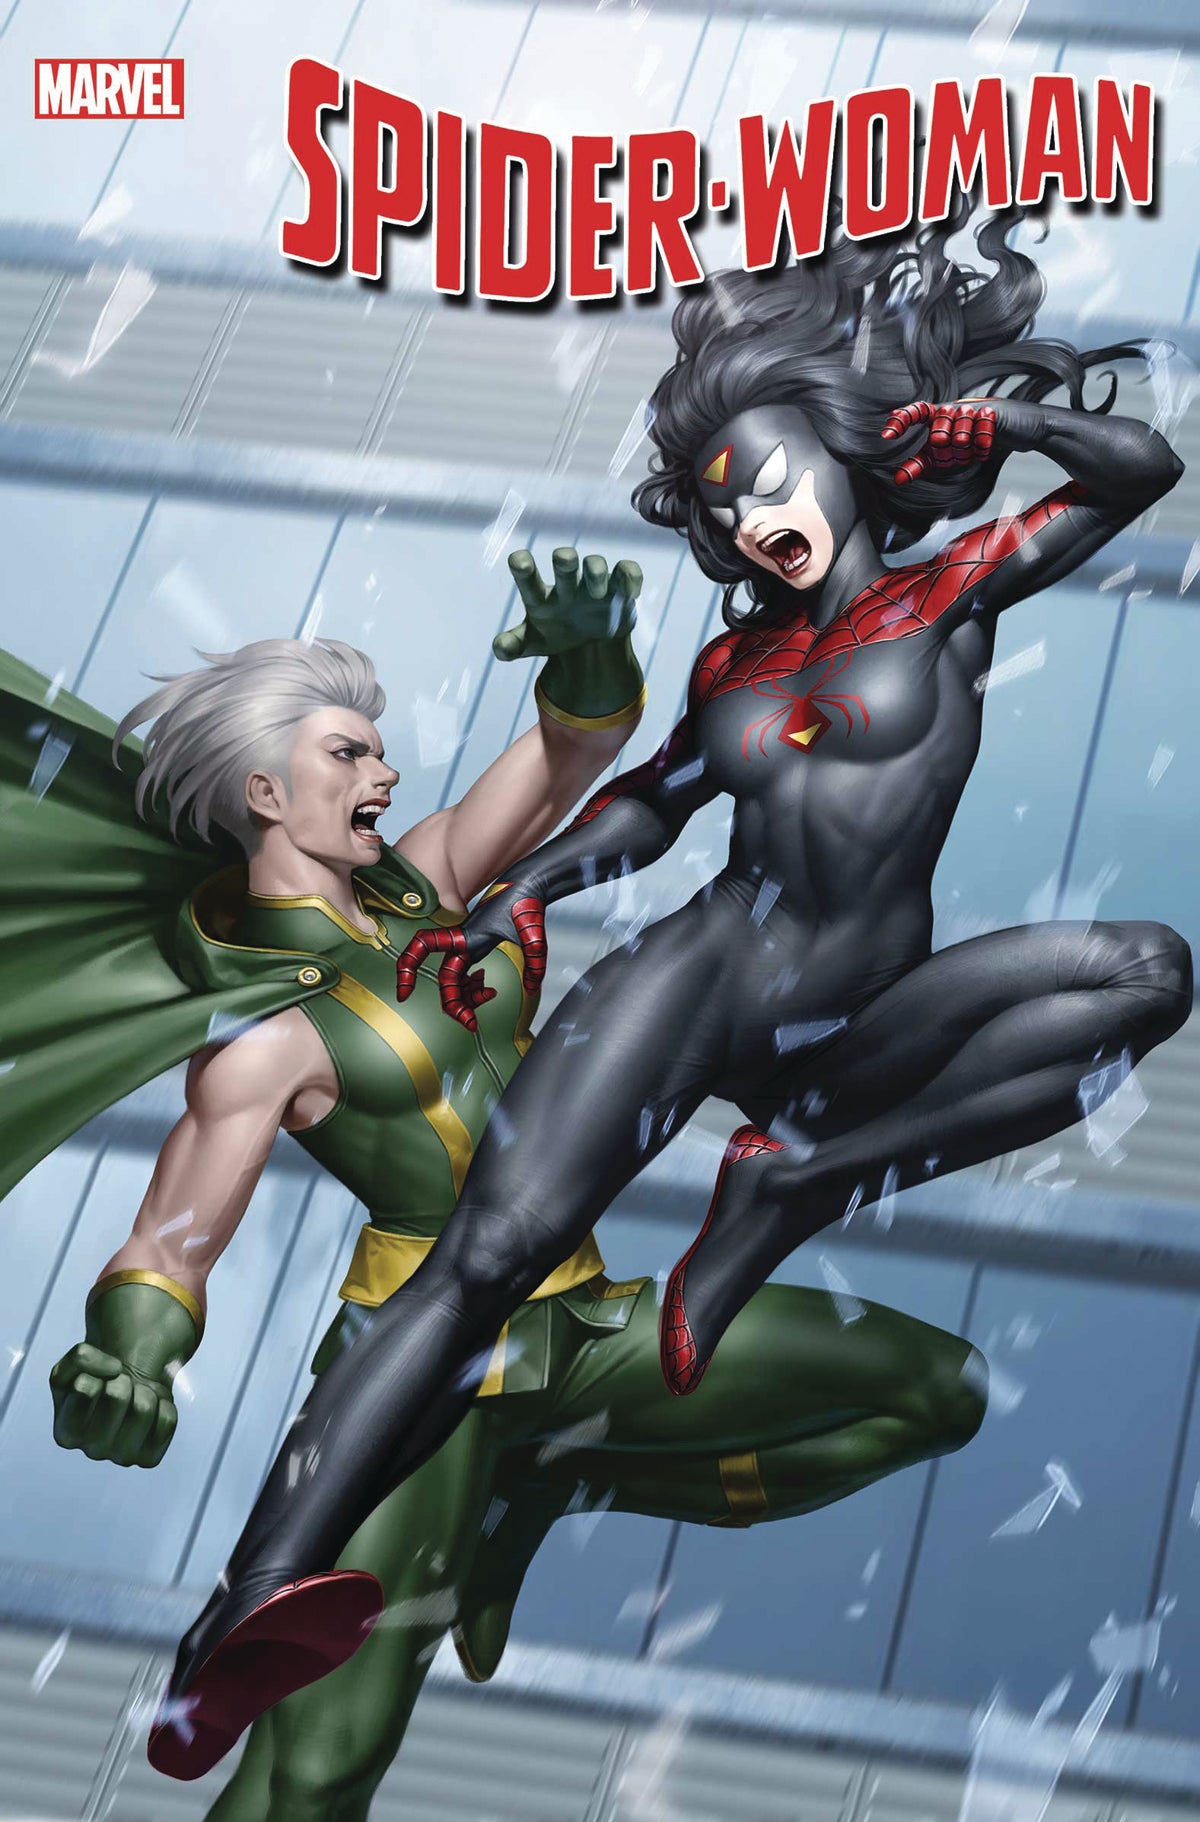 SPIDER-WOMAN #2 | Game Master's Emporium (The New GME)